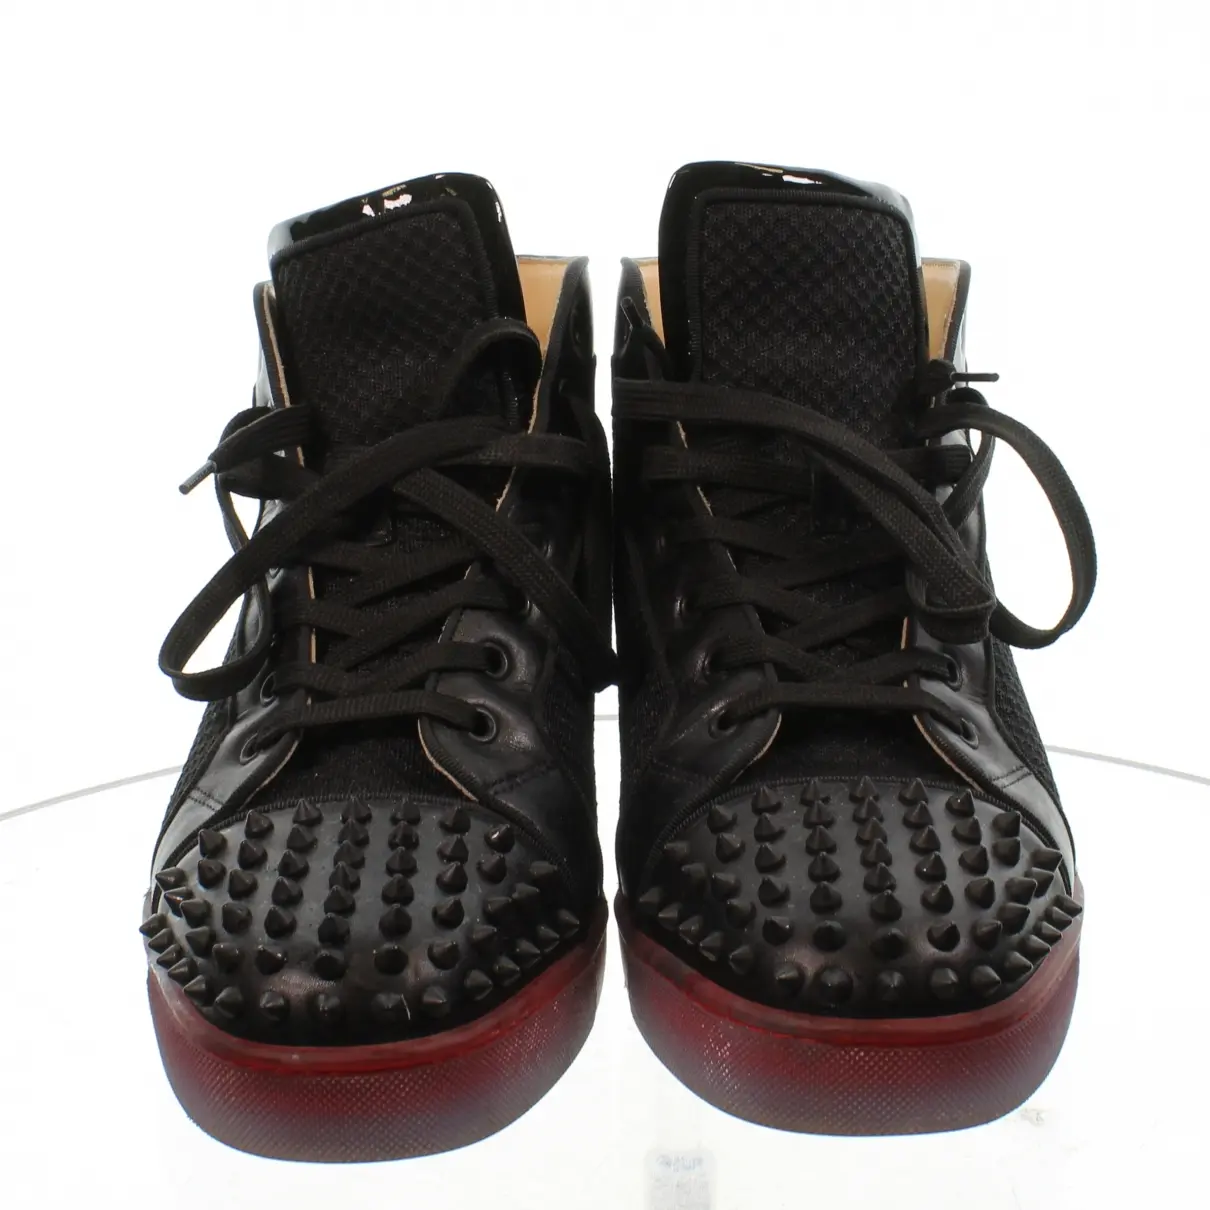 Buy Christian Louboutin Trainers online